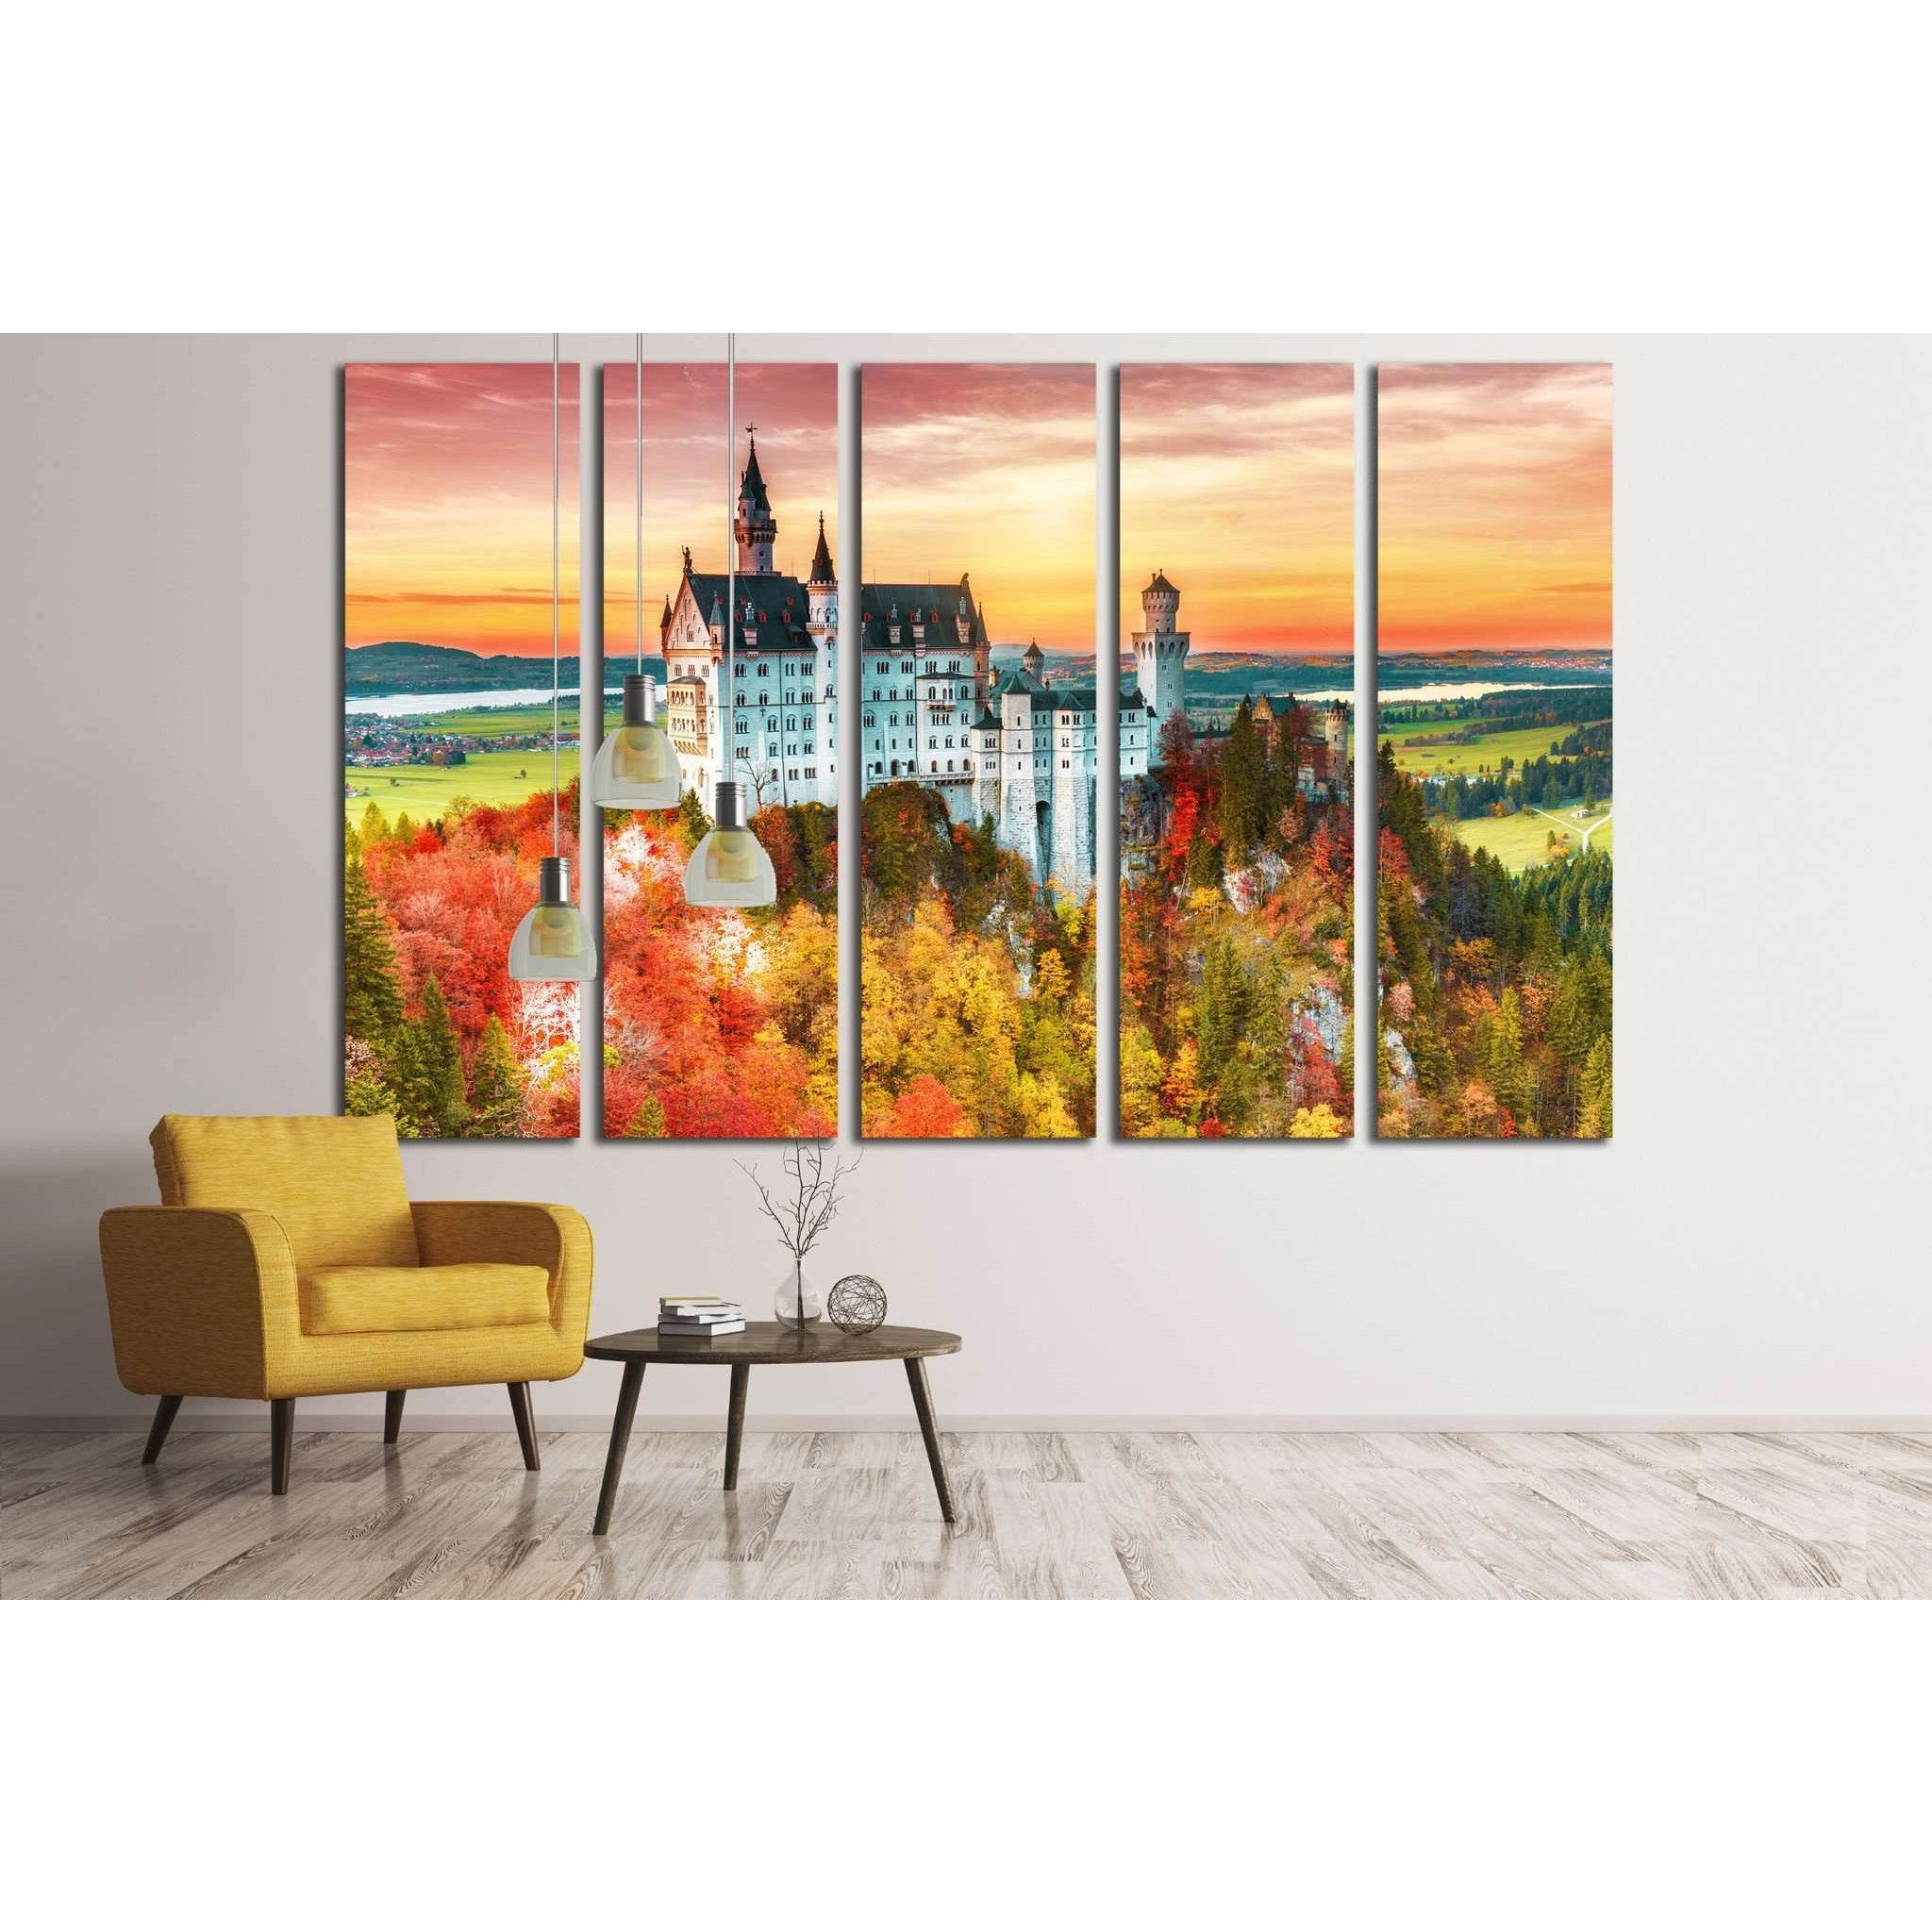 Neuschwanstein castle, Palace situated in Bavaria, Germany №1806 Ready to Hang Canvas Print